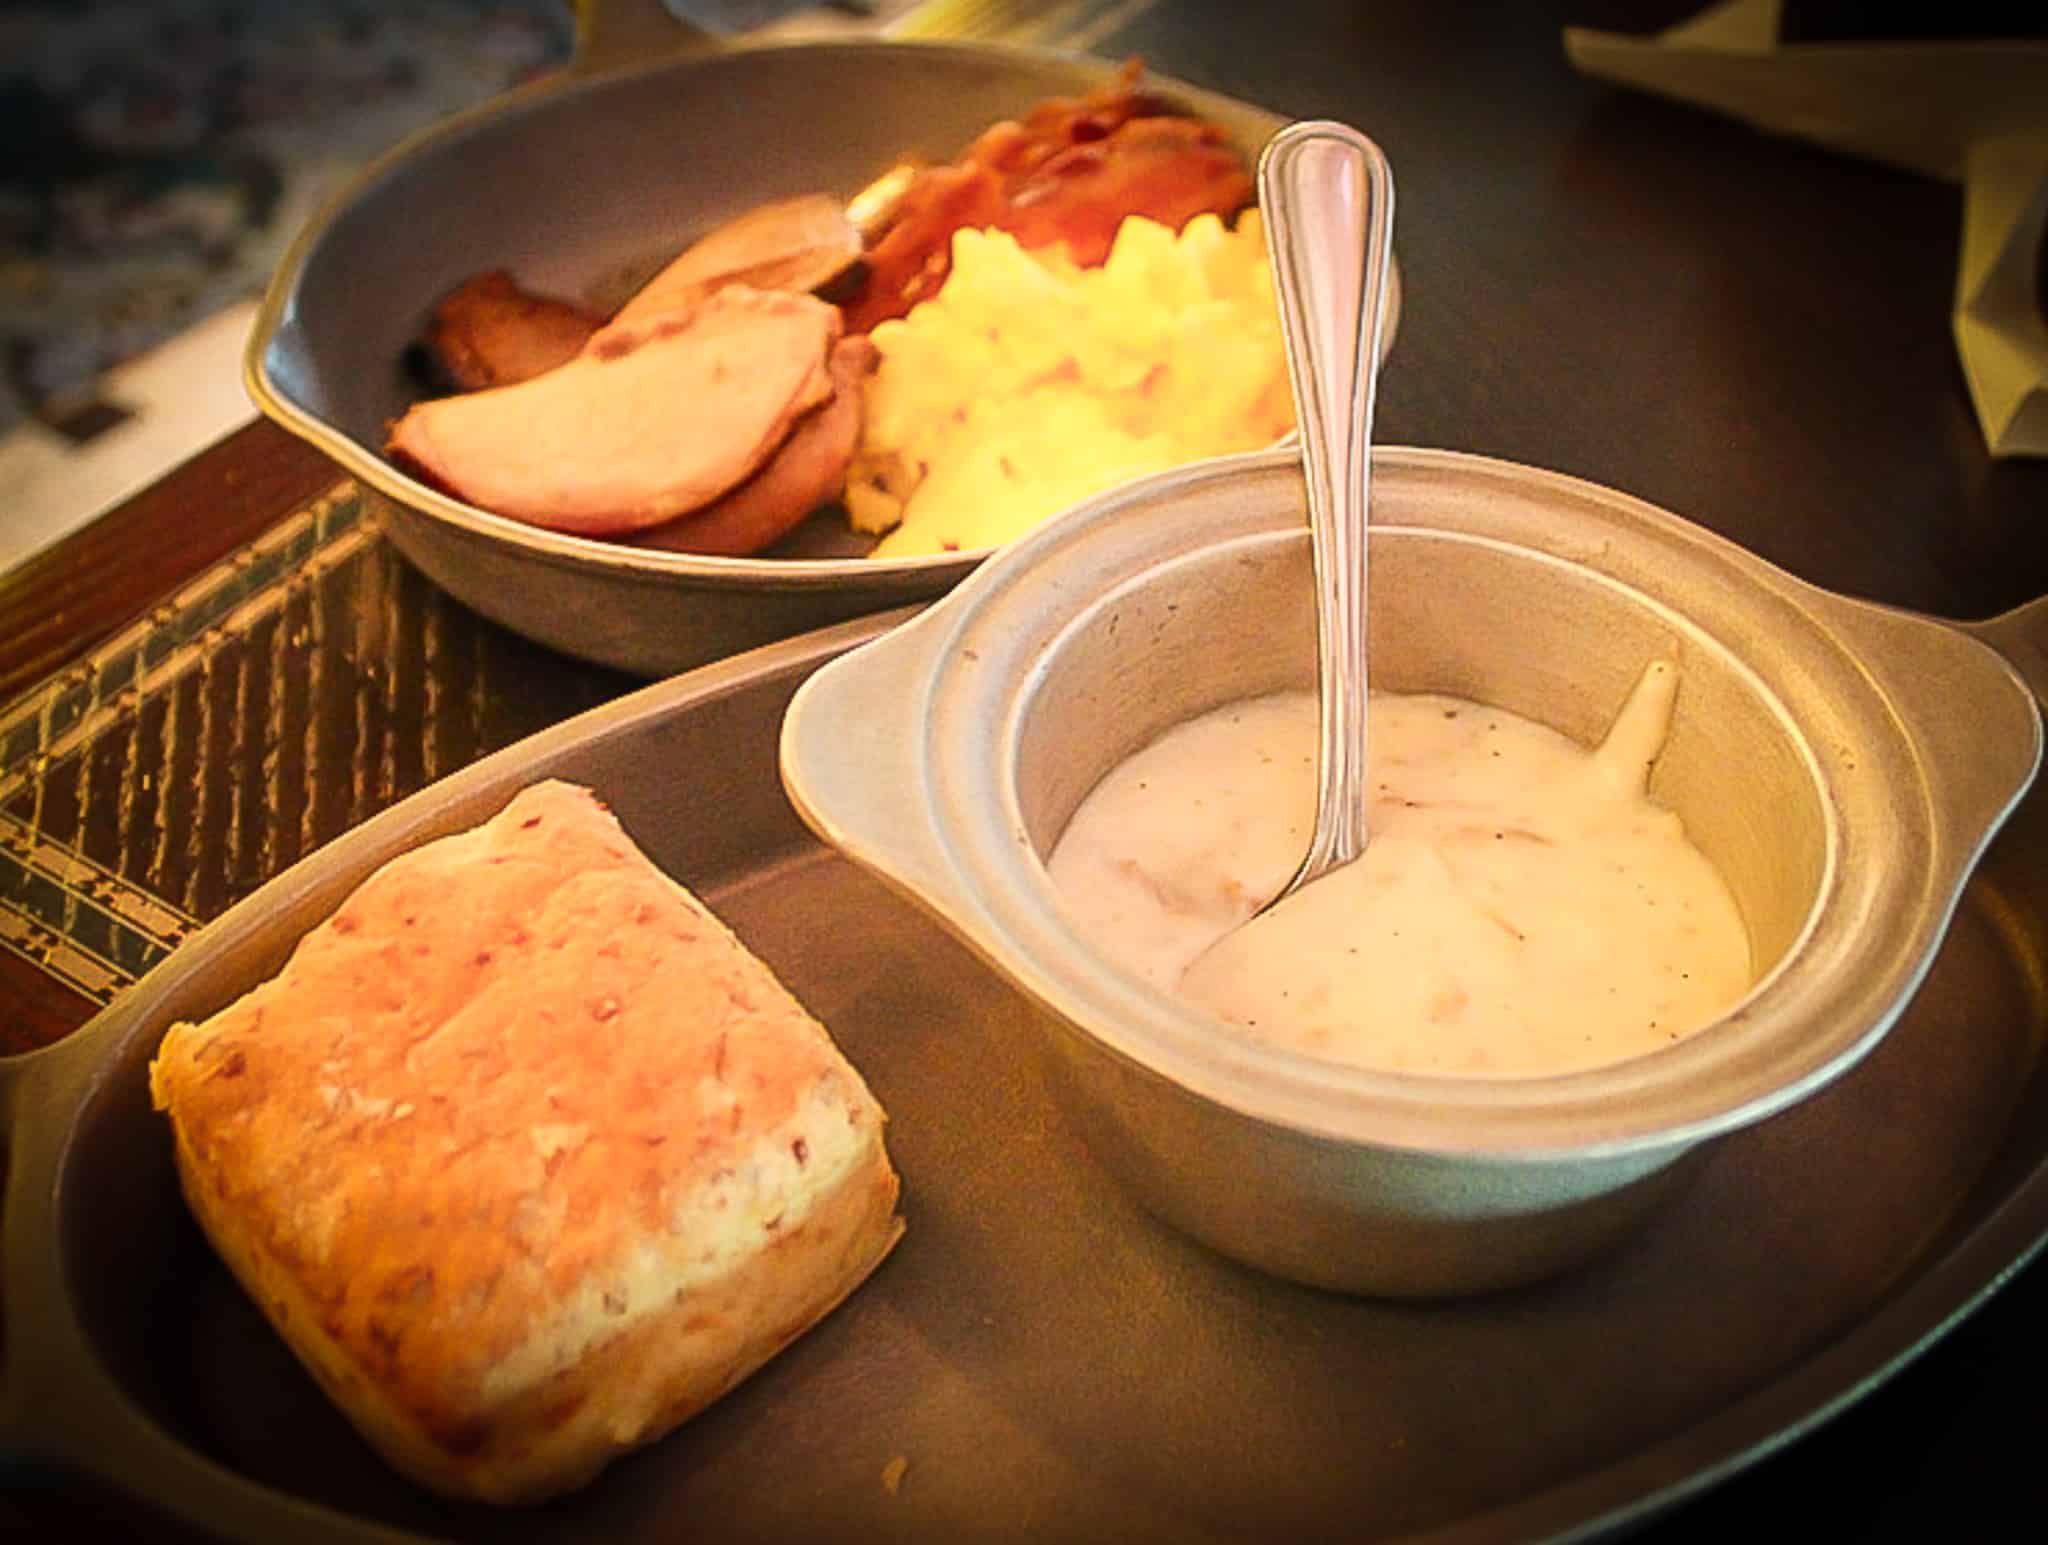 a biscuit and gravy from Whispering Canyon Cafe 